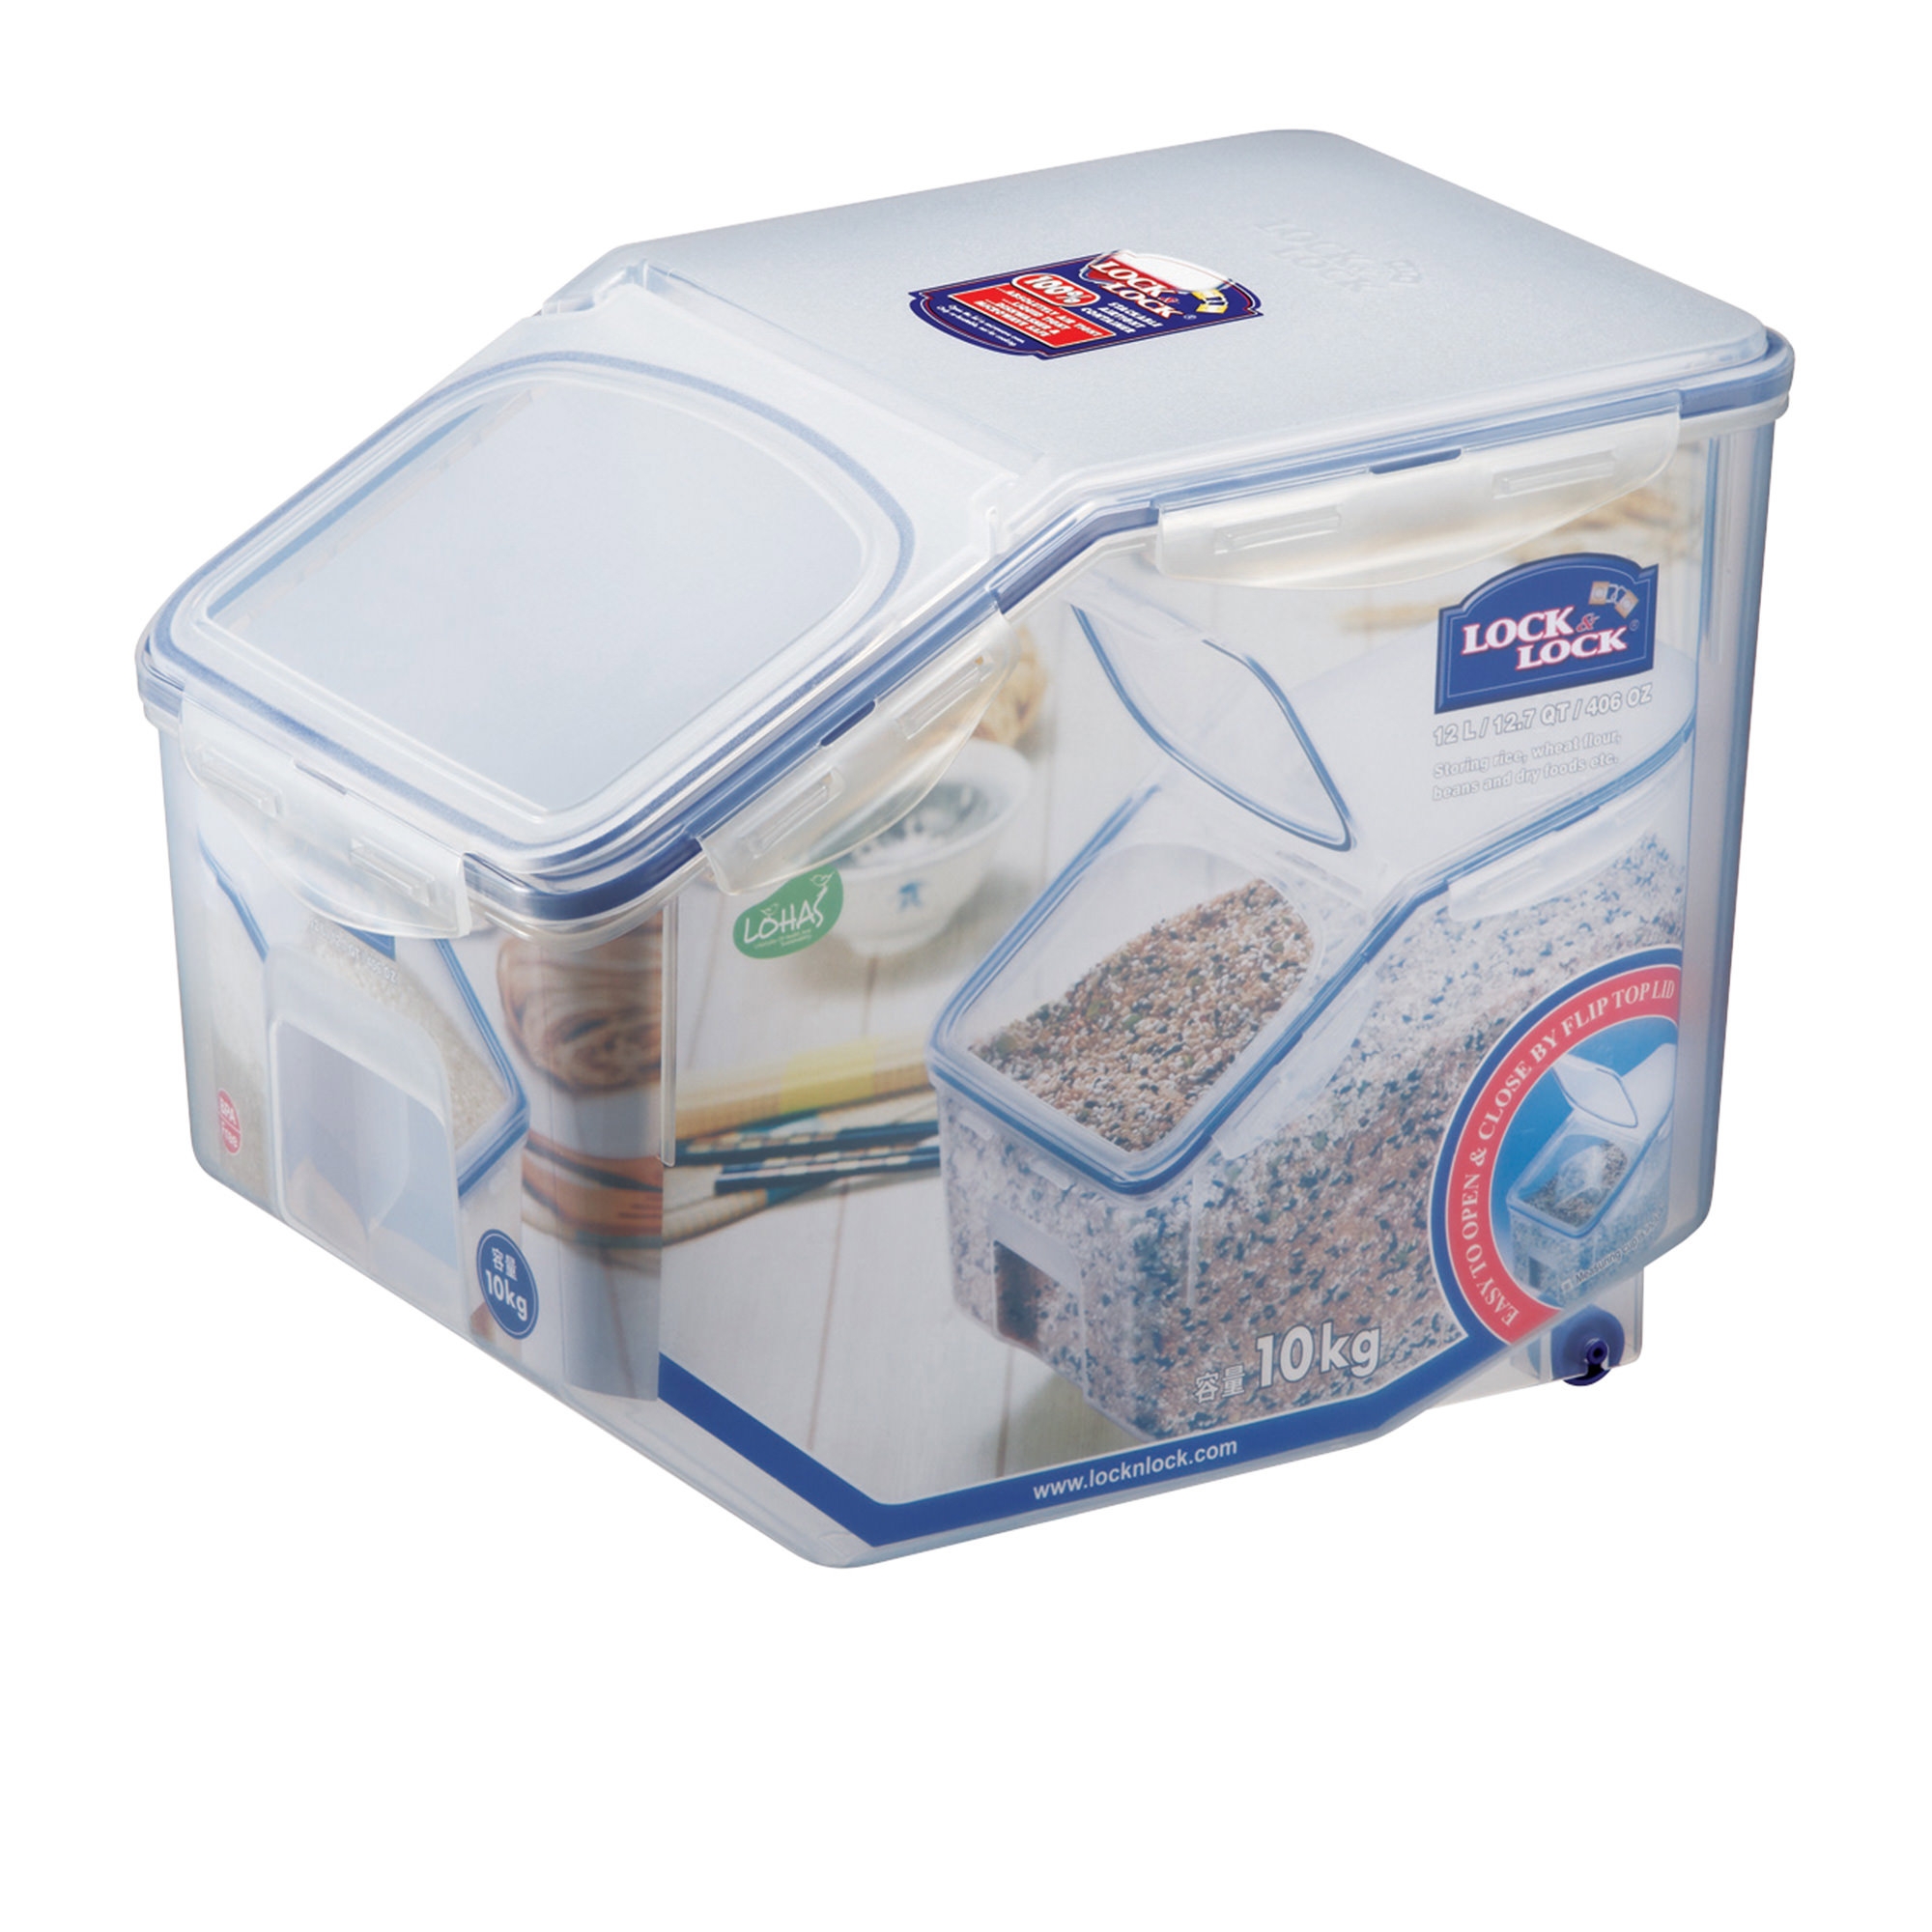 Lock & Lock Rice Case with Cup 12L Image 1